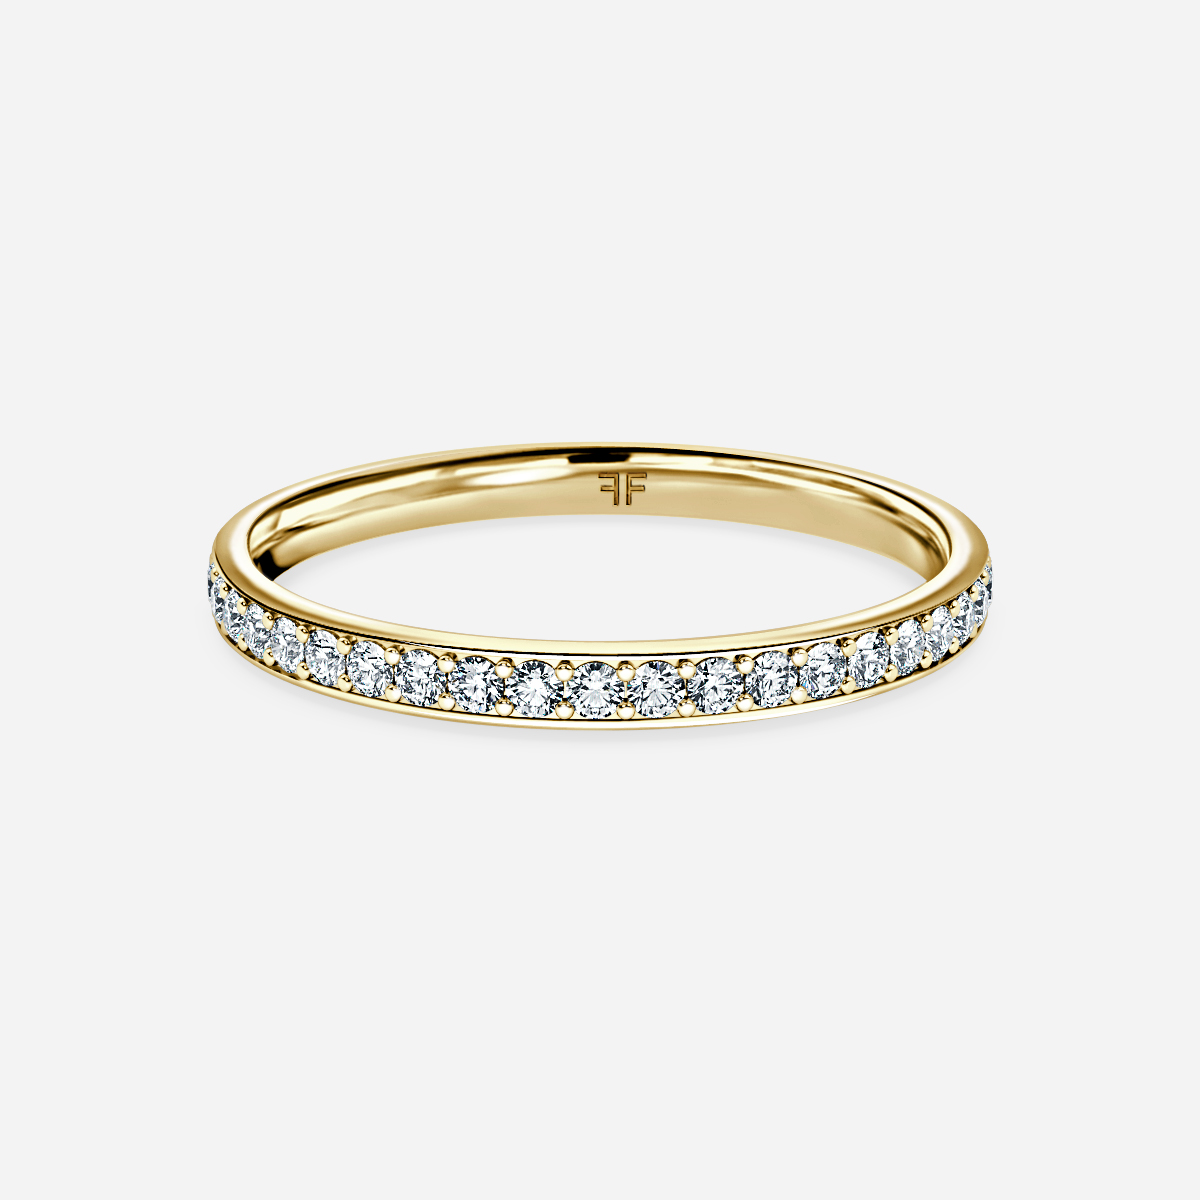 Yellow gold eternity rings